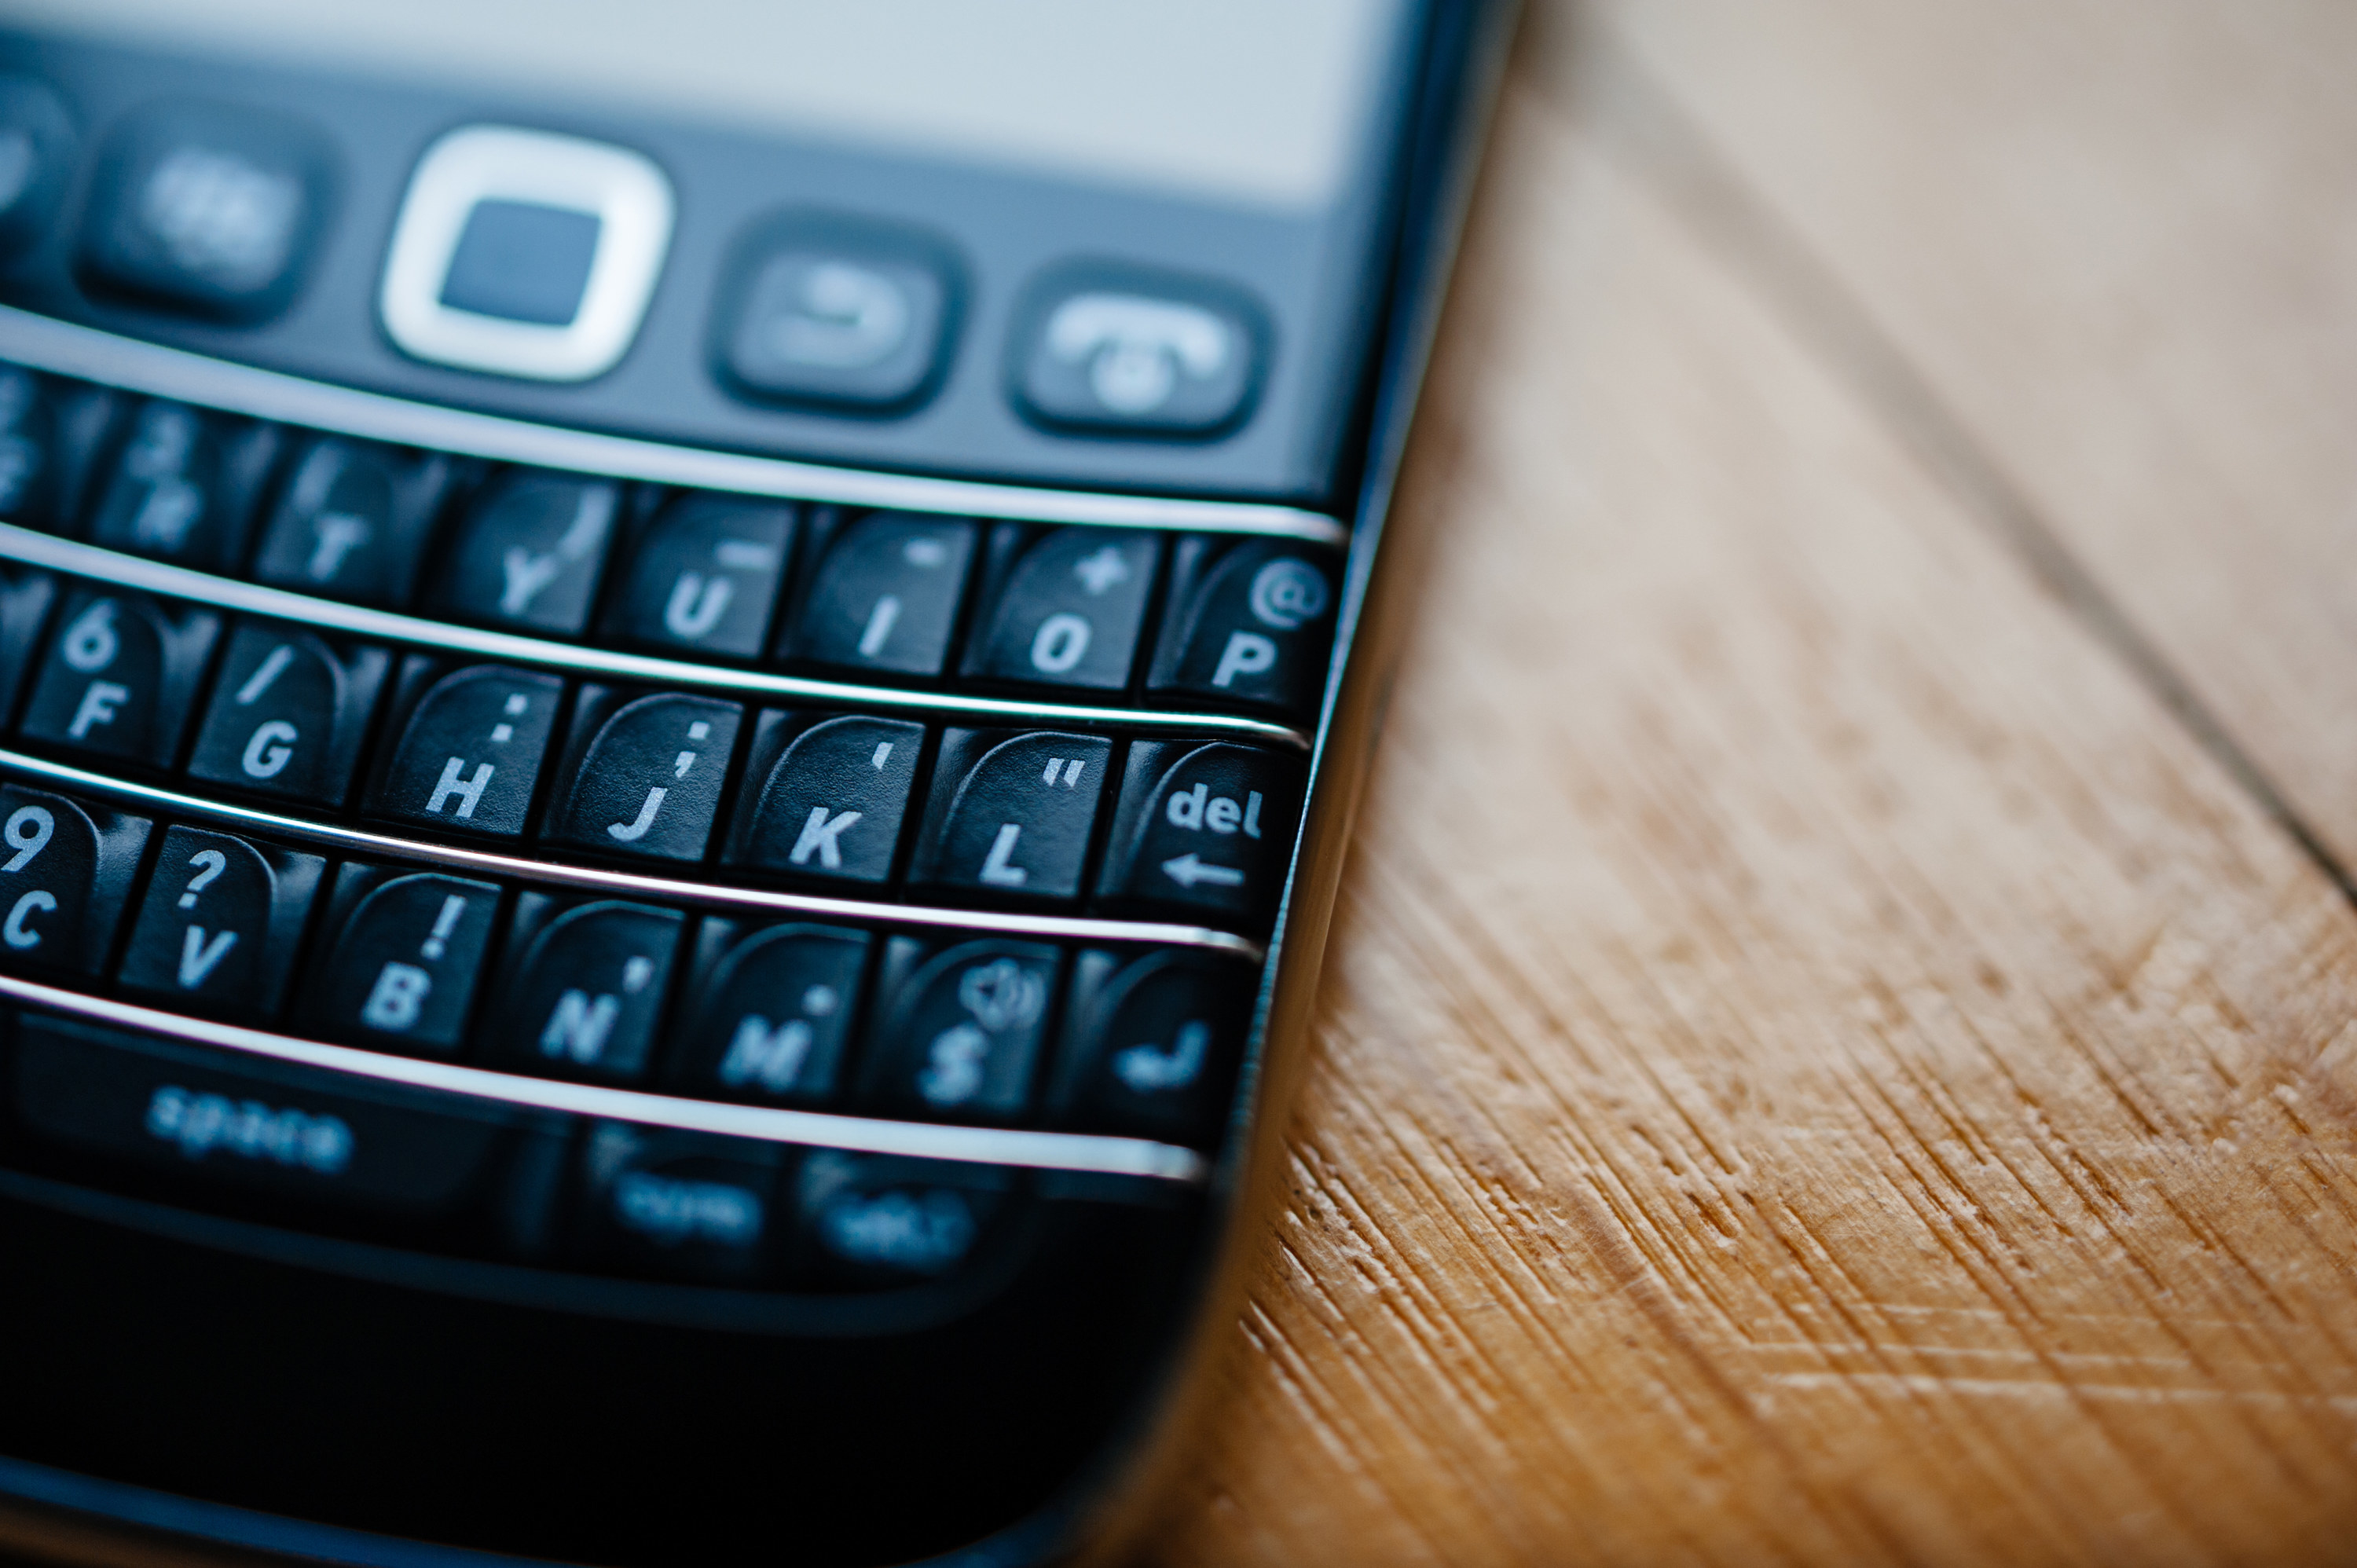 a Blackberry phone keyboard on a table